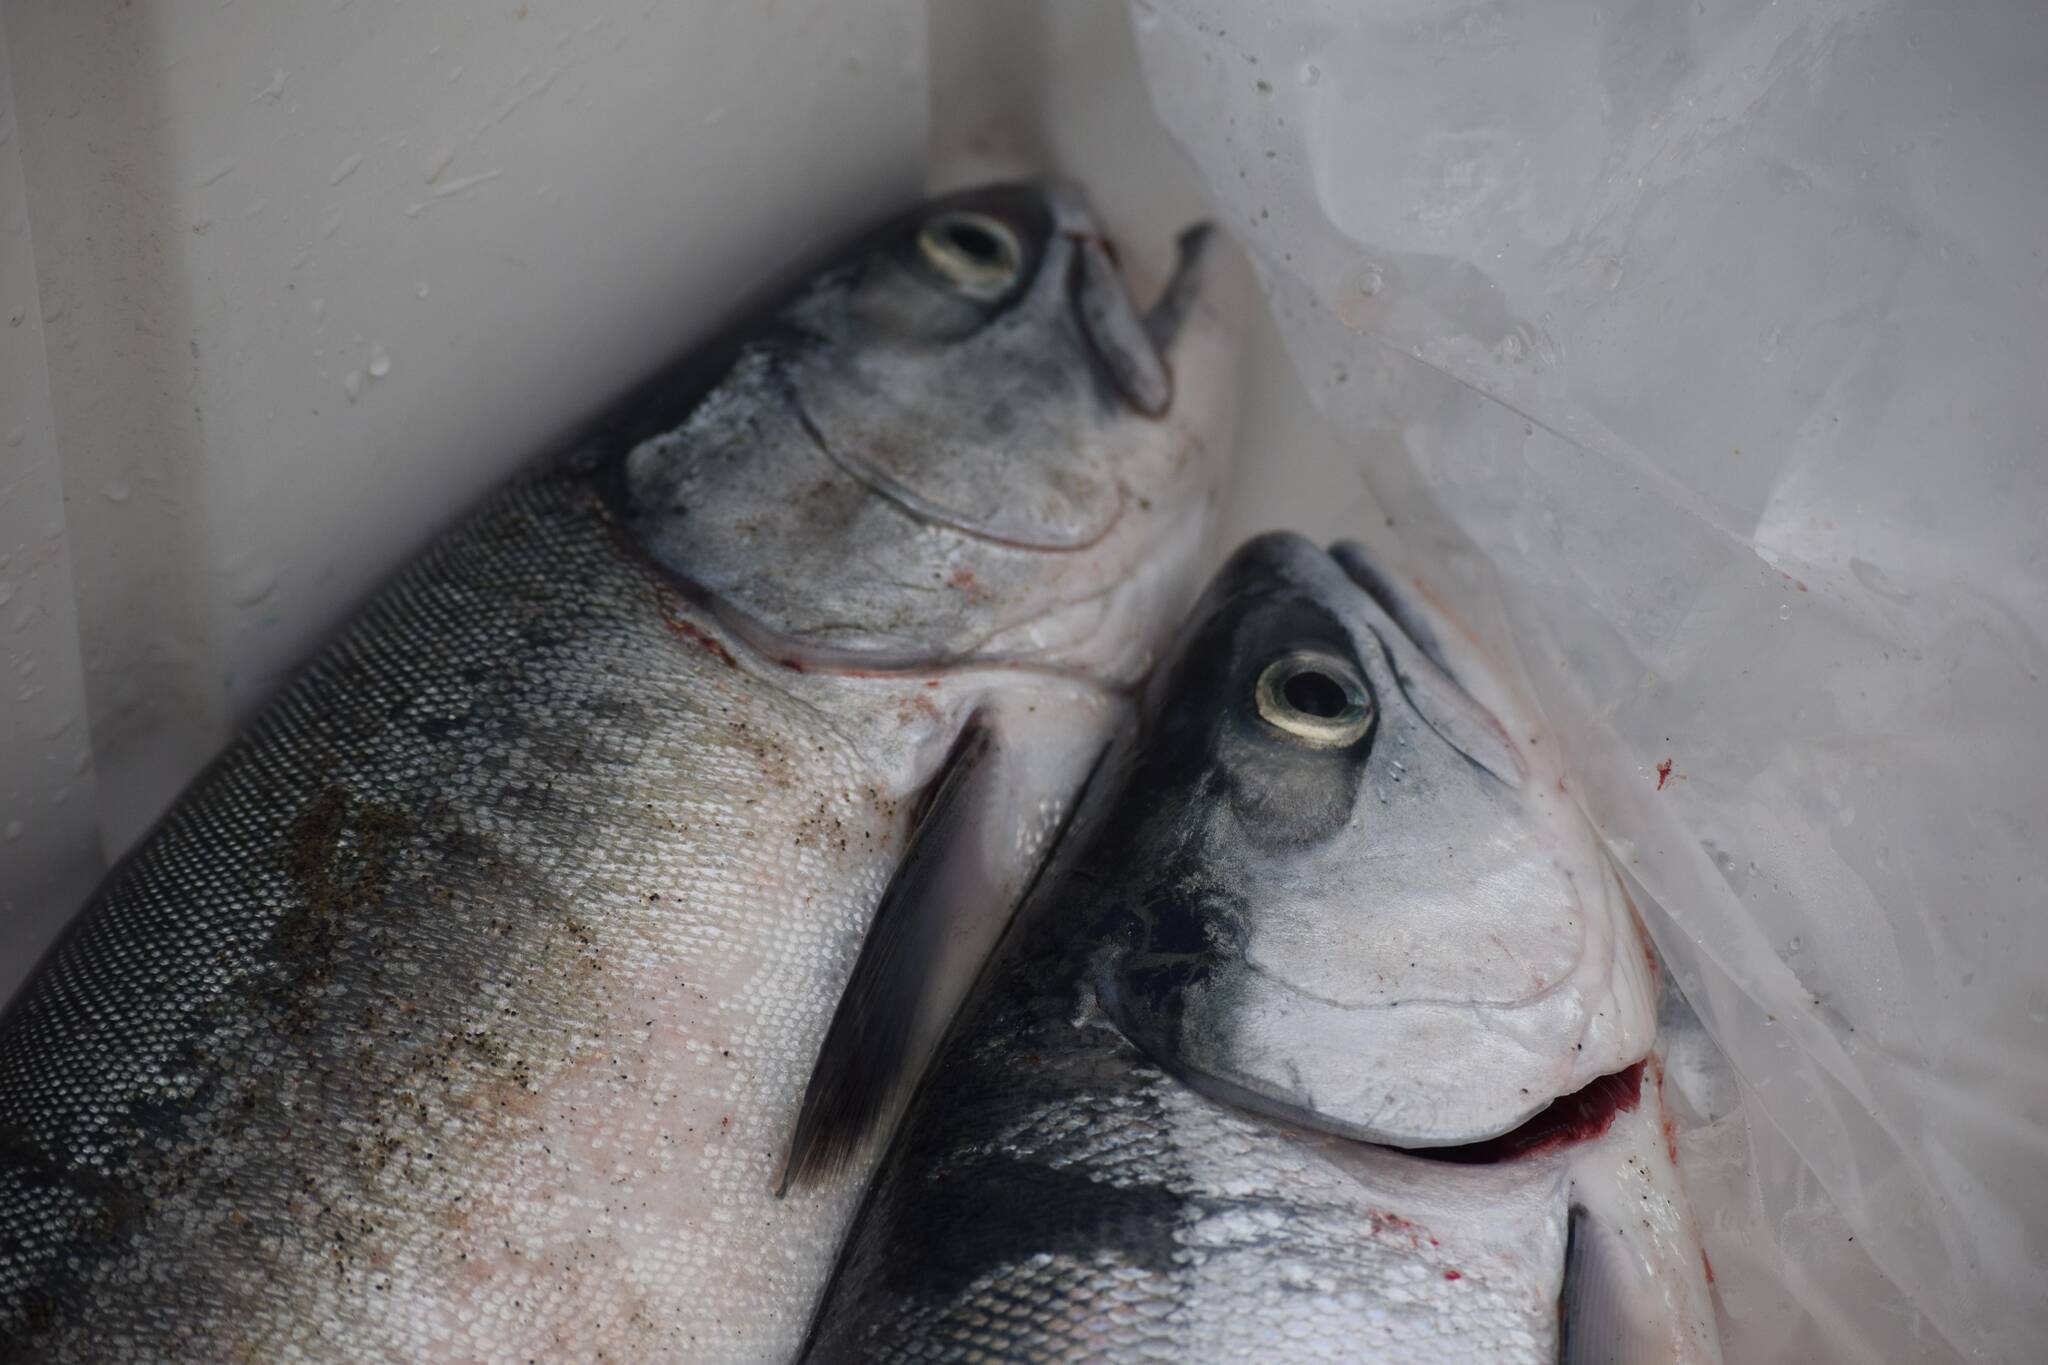 Salmon harvested in Cook Inlet are preserved in a cooler on Saturday, July 10, 2021 in Kenai, Alaska. (Camille Botello / Peninsula Clarion)